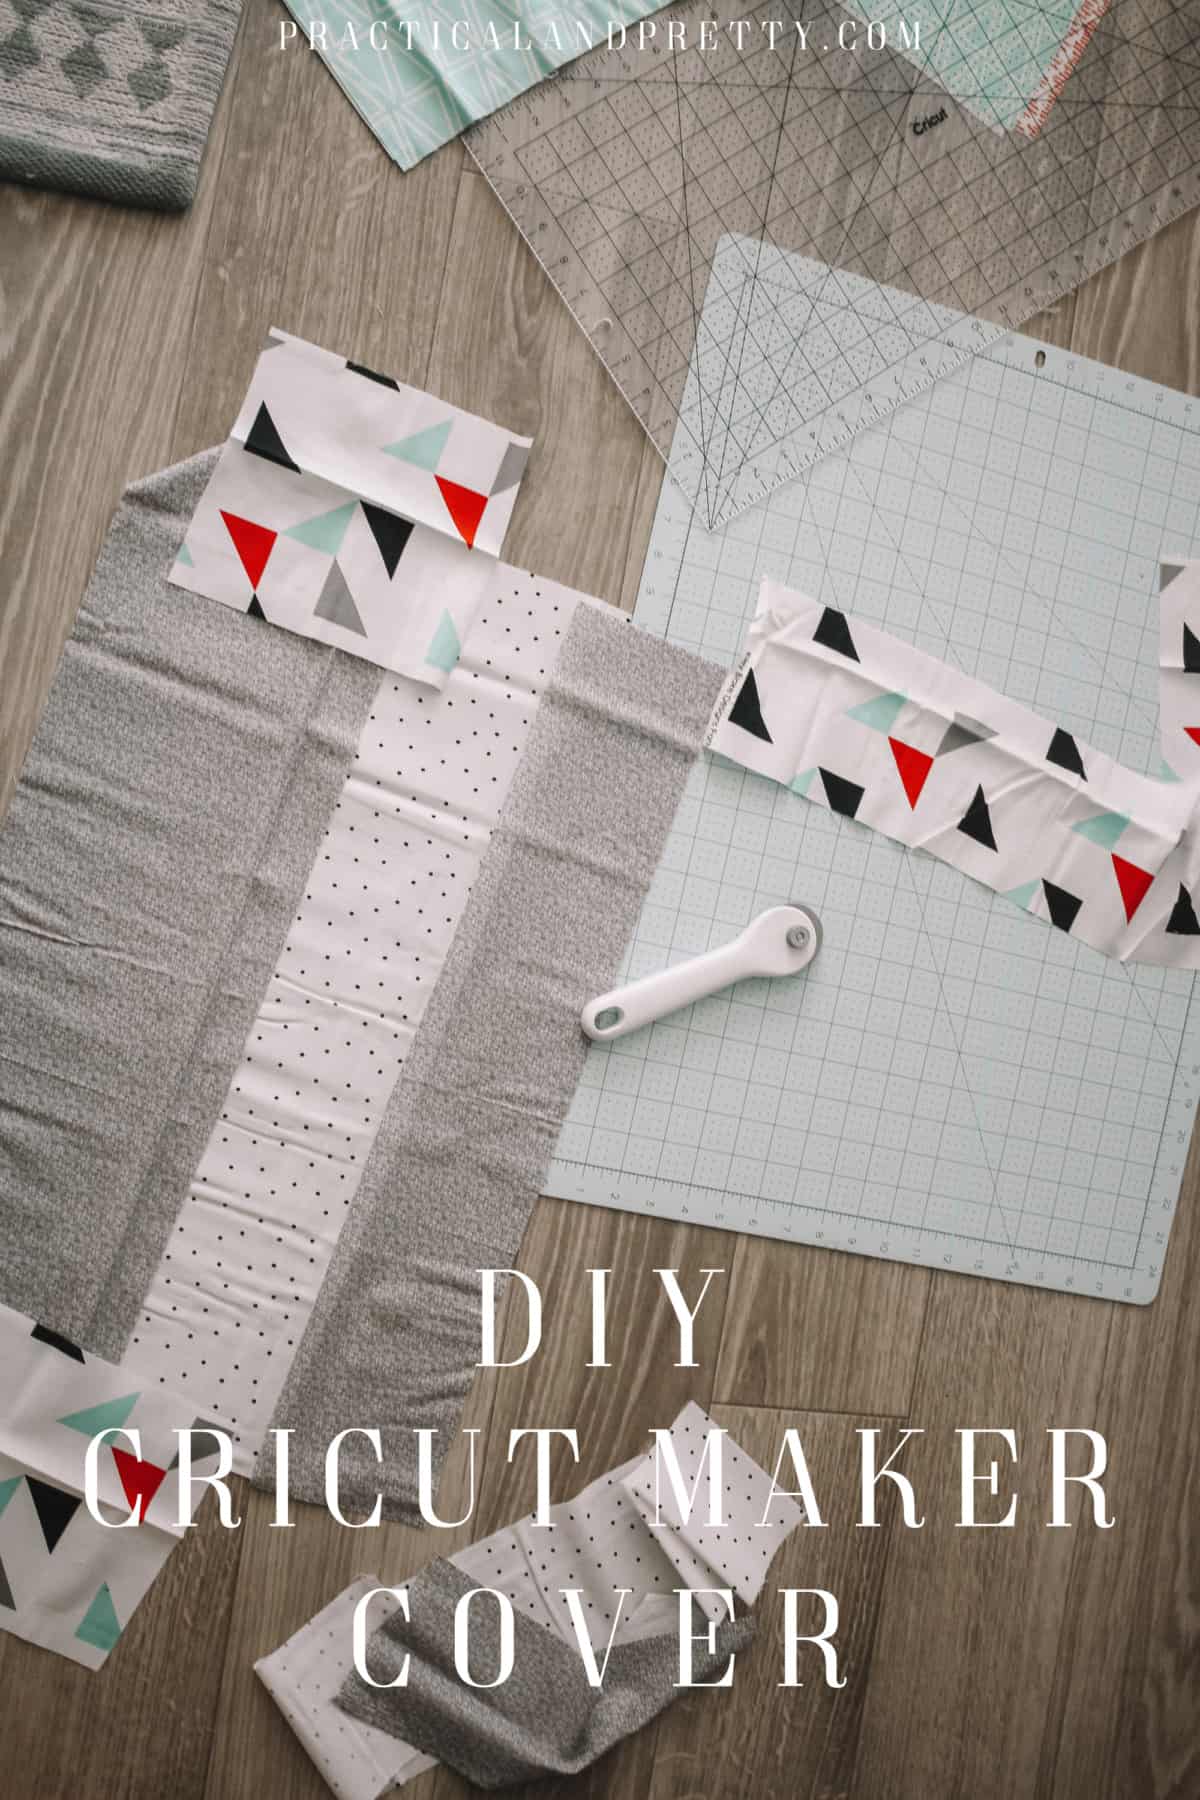 A simple and easy cover for your Cricut cutting machine to help protect it from dust!